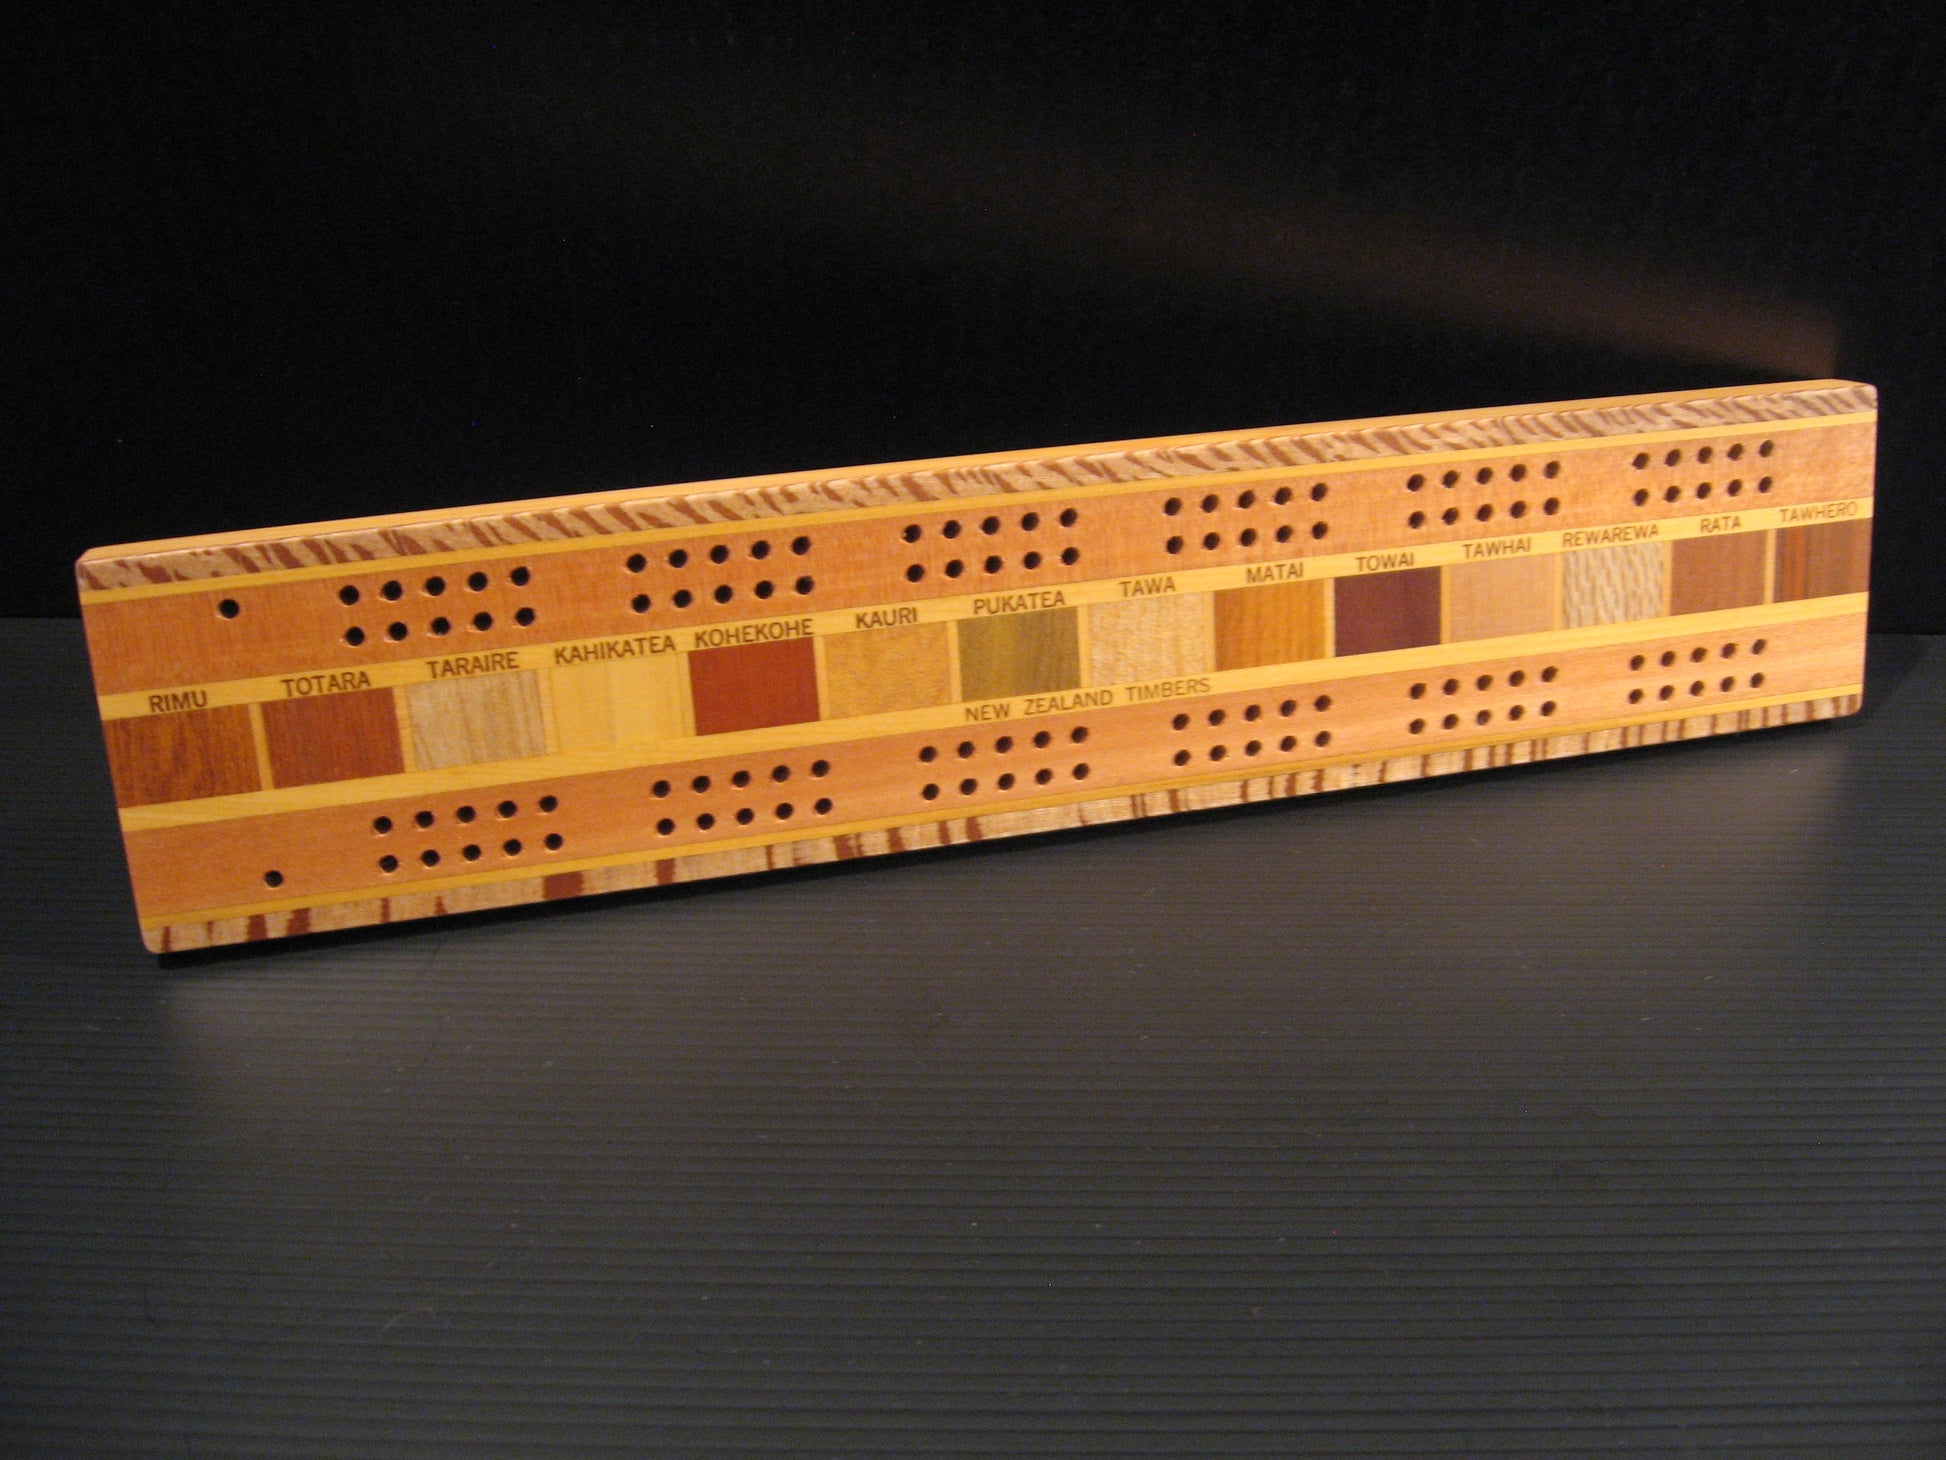 Wooden Cribbage Board for Two Players by Timber Arts Silver Fern Gallery